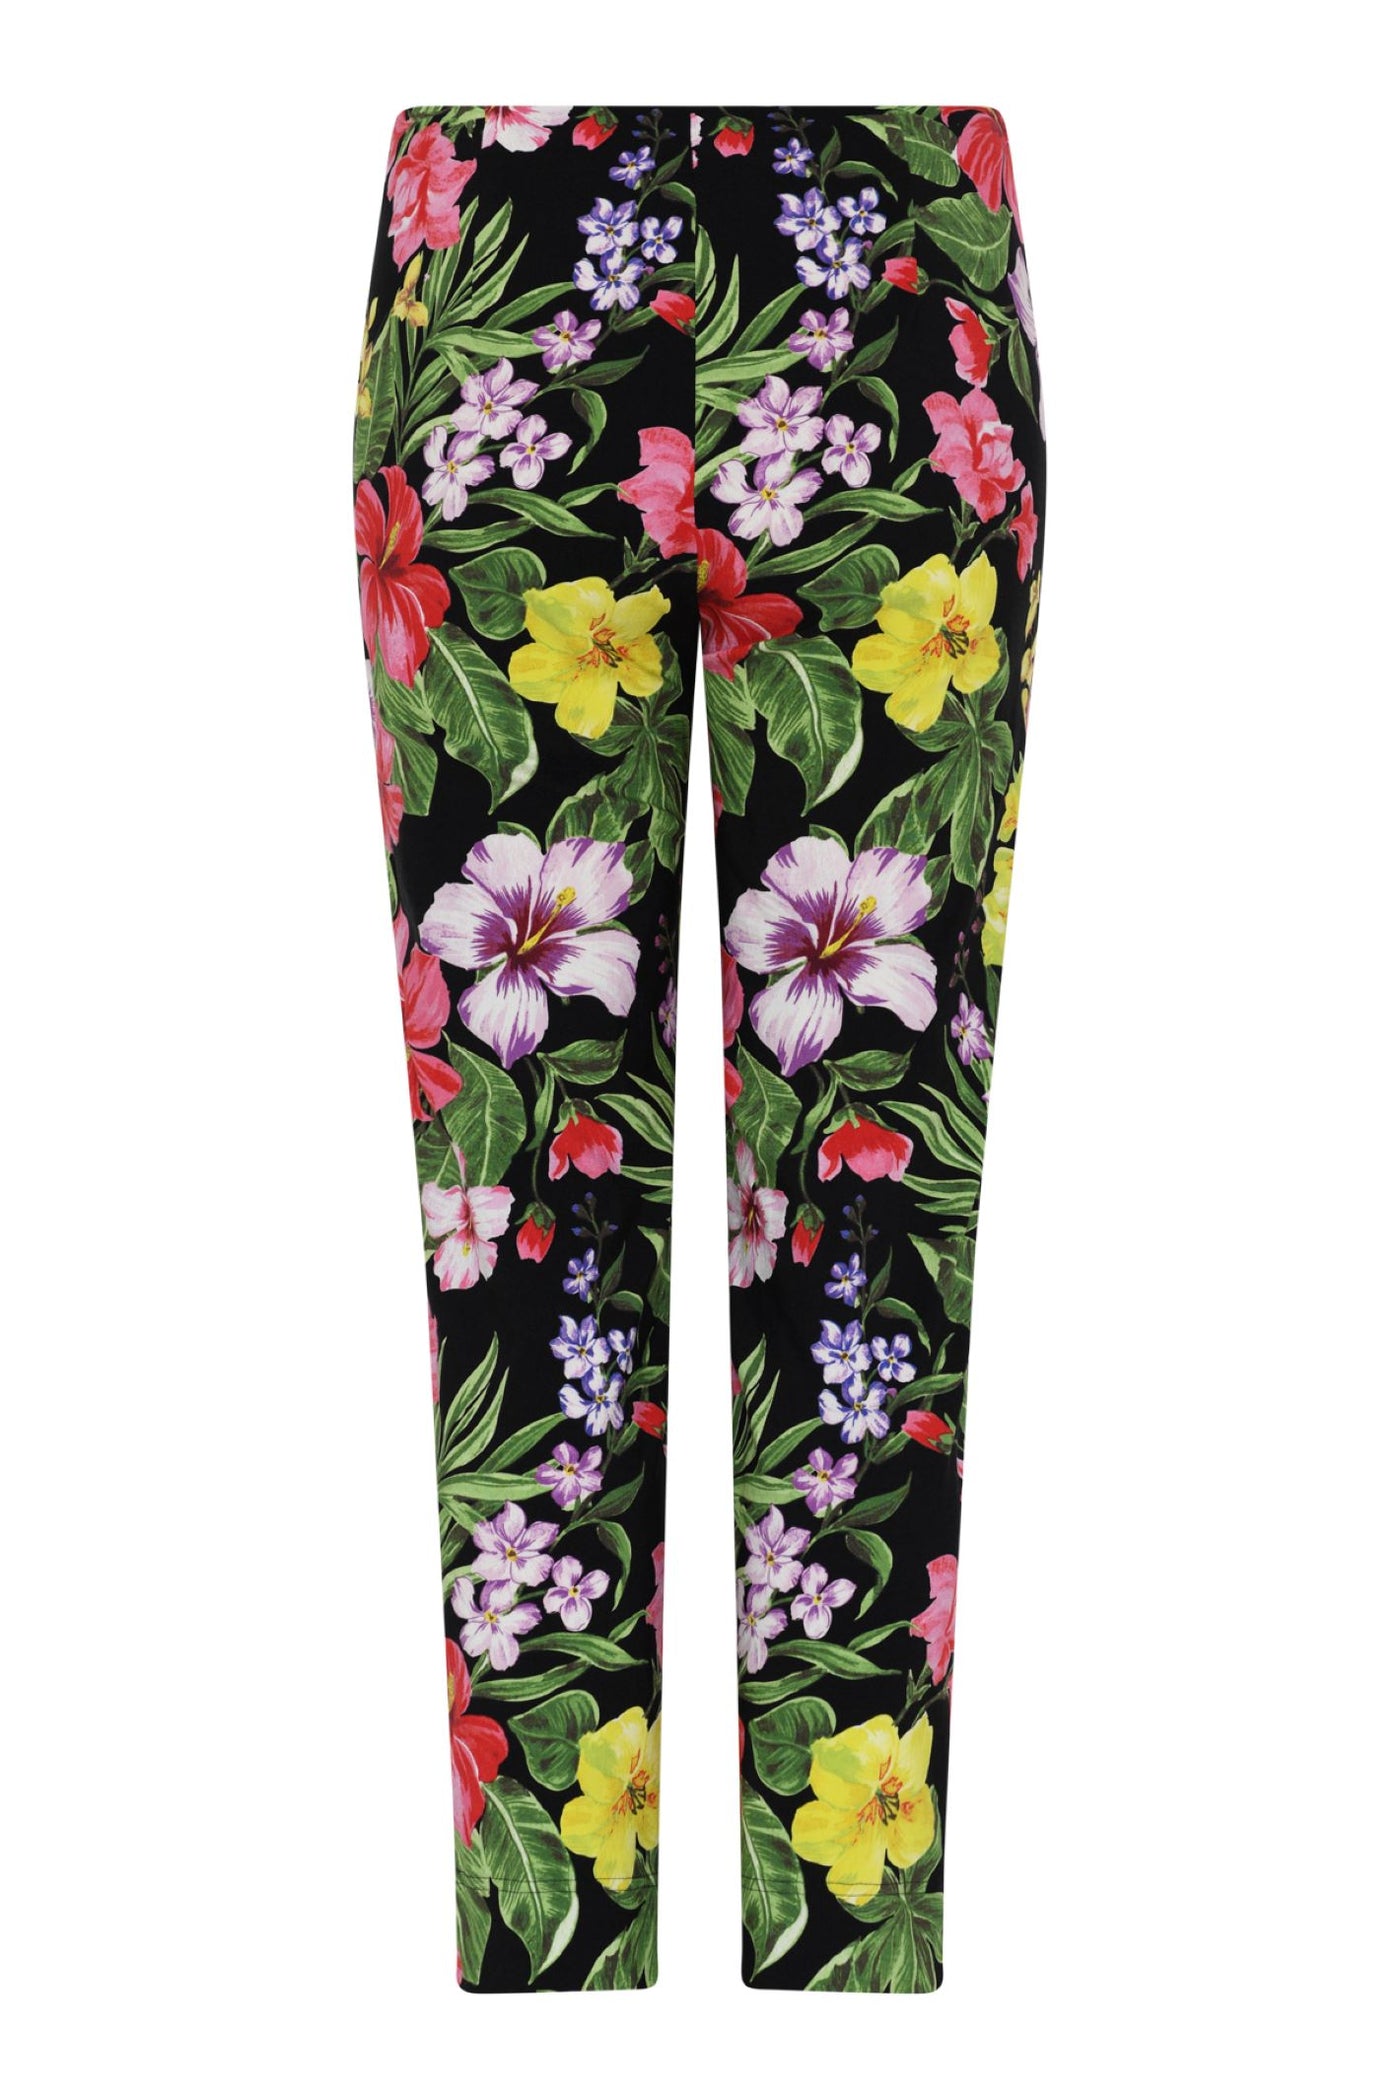 Robell Black Floral Trousers Rose 51622